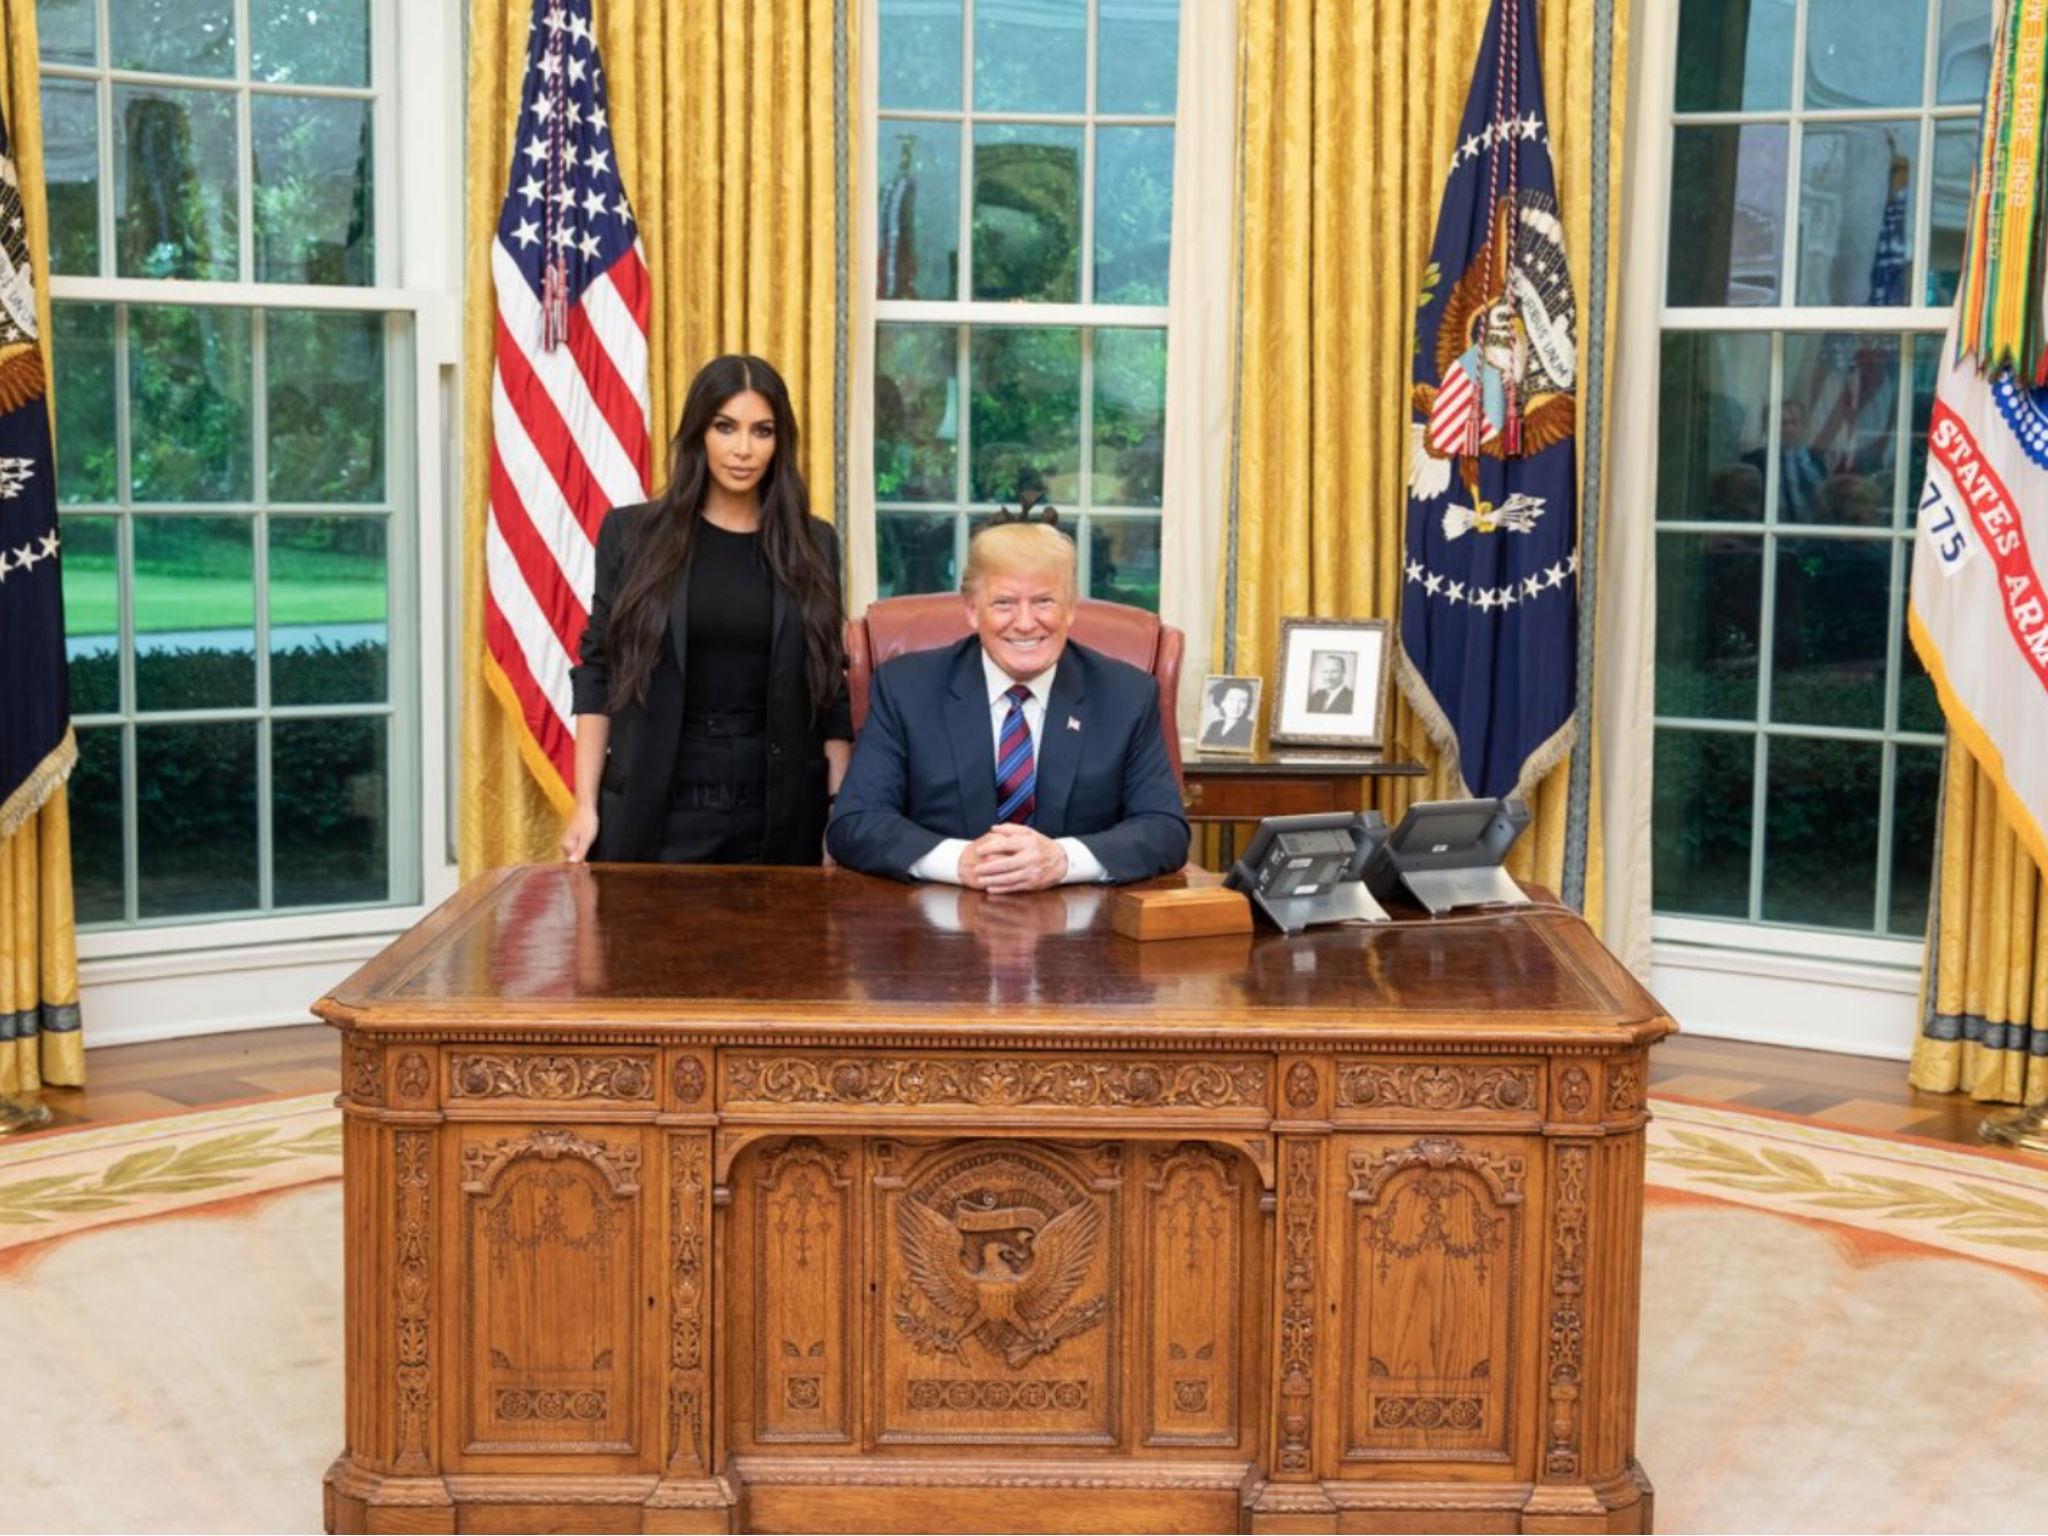 Kardashian West visited Mr Trump to campaign for the pardon of Alice Marie Johnson